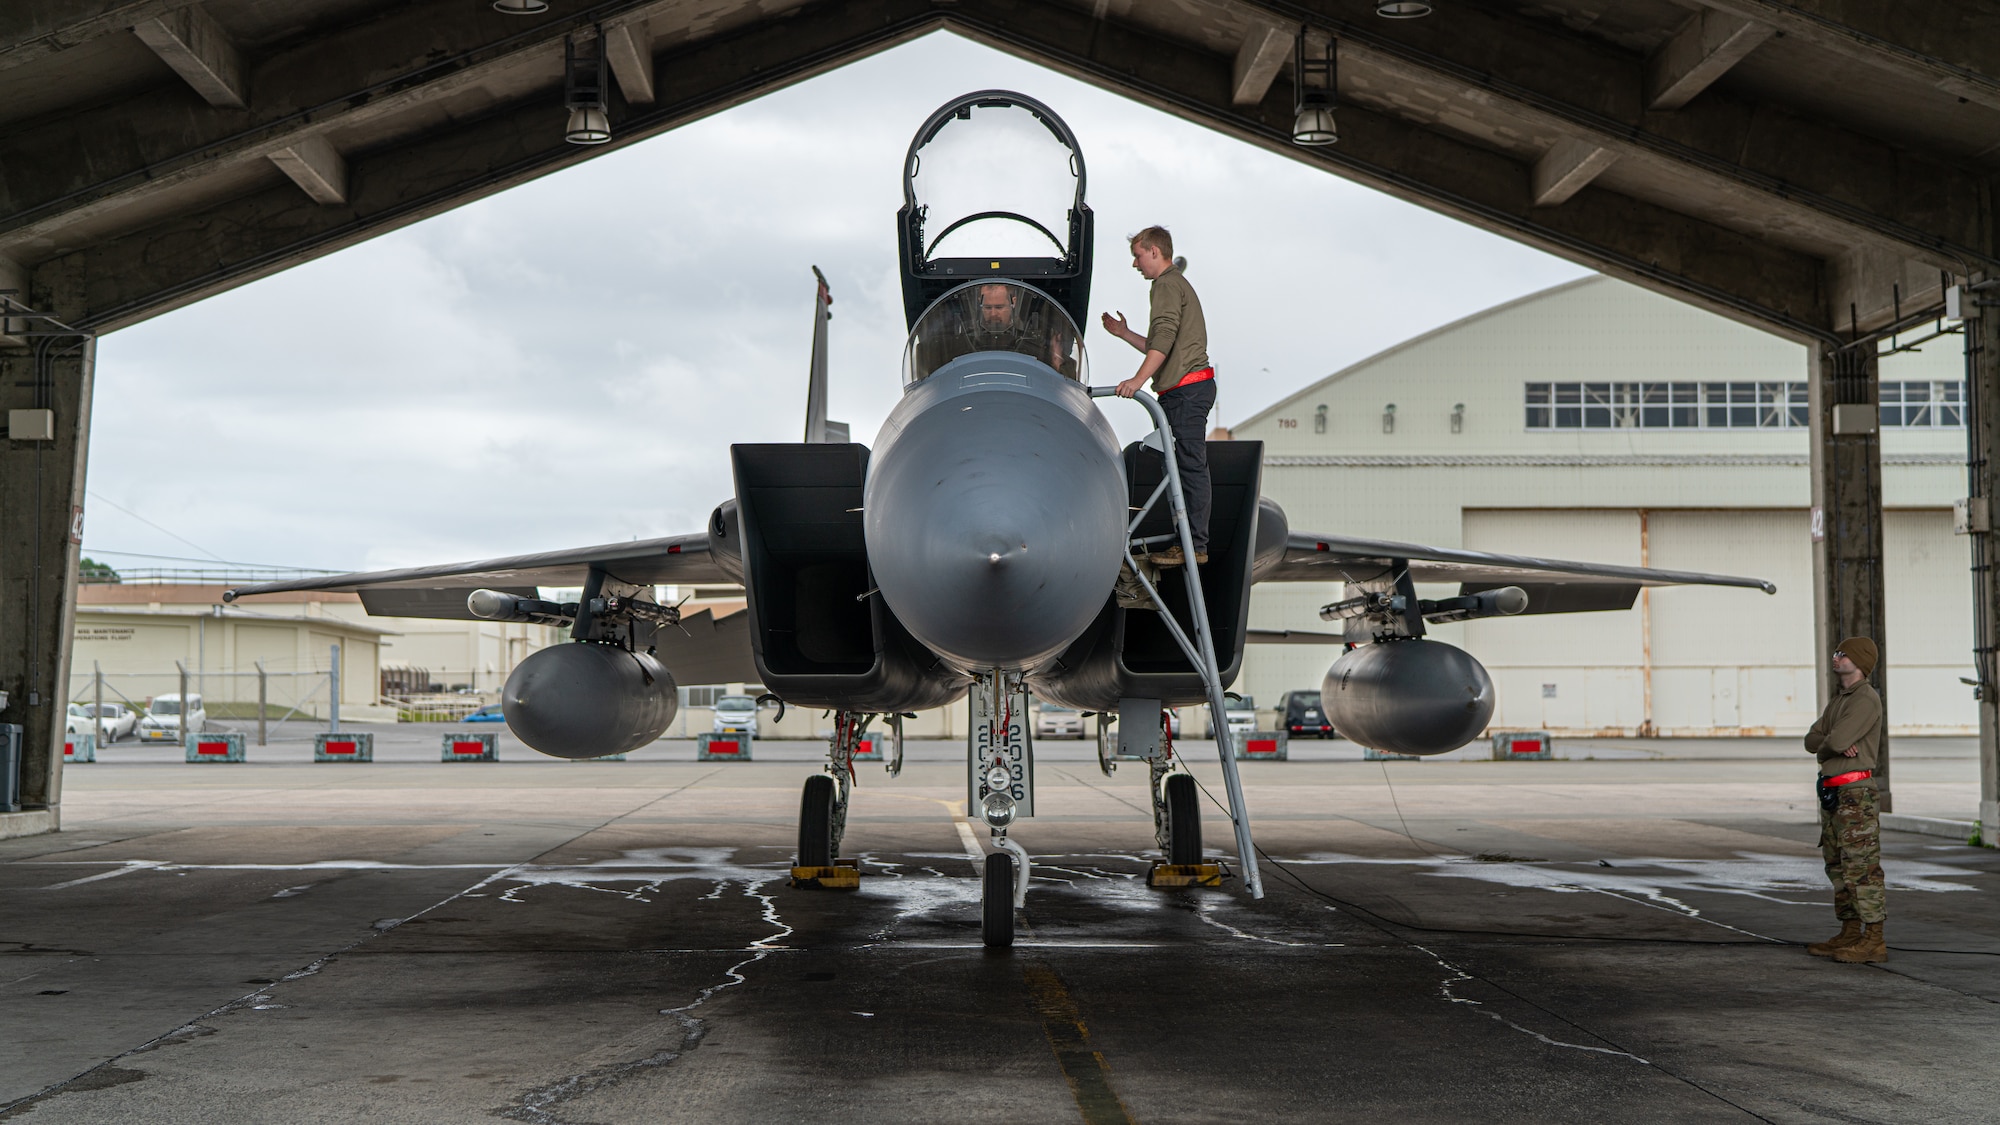 A U.S. Air Force pilot assigned to the 44th Fighter Squadron, left, and Airman 1st Class Gavin Tullier, 67th Aircraft Maintenance Unit crew chief, finalize preflight checks on an F-15C Eagle during a readiness exercise at Kadena Air Base, Japan, March 15, 2023. The 18th Wing is postured to respond to demanding scenarios, and continuously focuses on keeping forces ready for high-end missions through daily training and readiness exercises. (U.S. Air Force photo by Senior Airman Sebastian Romawac)